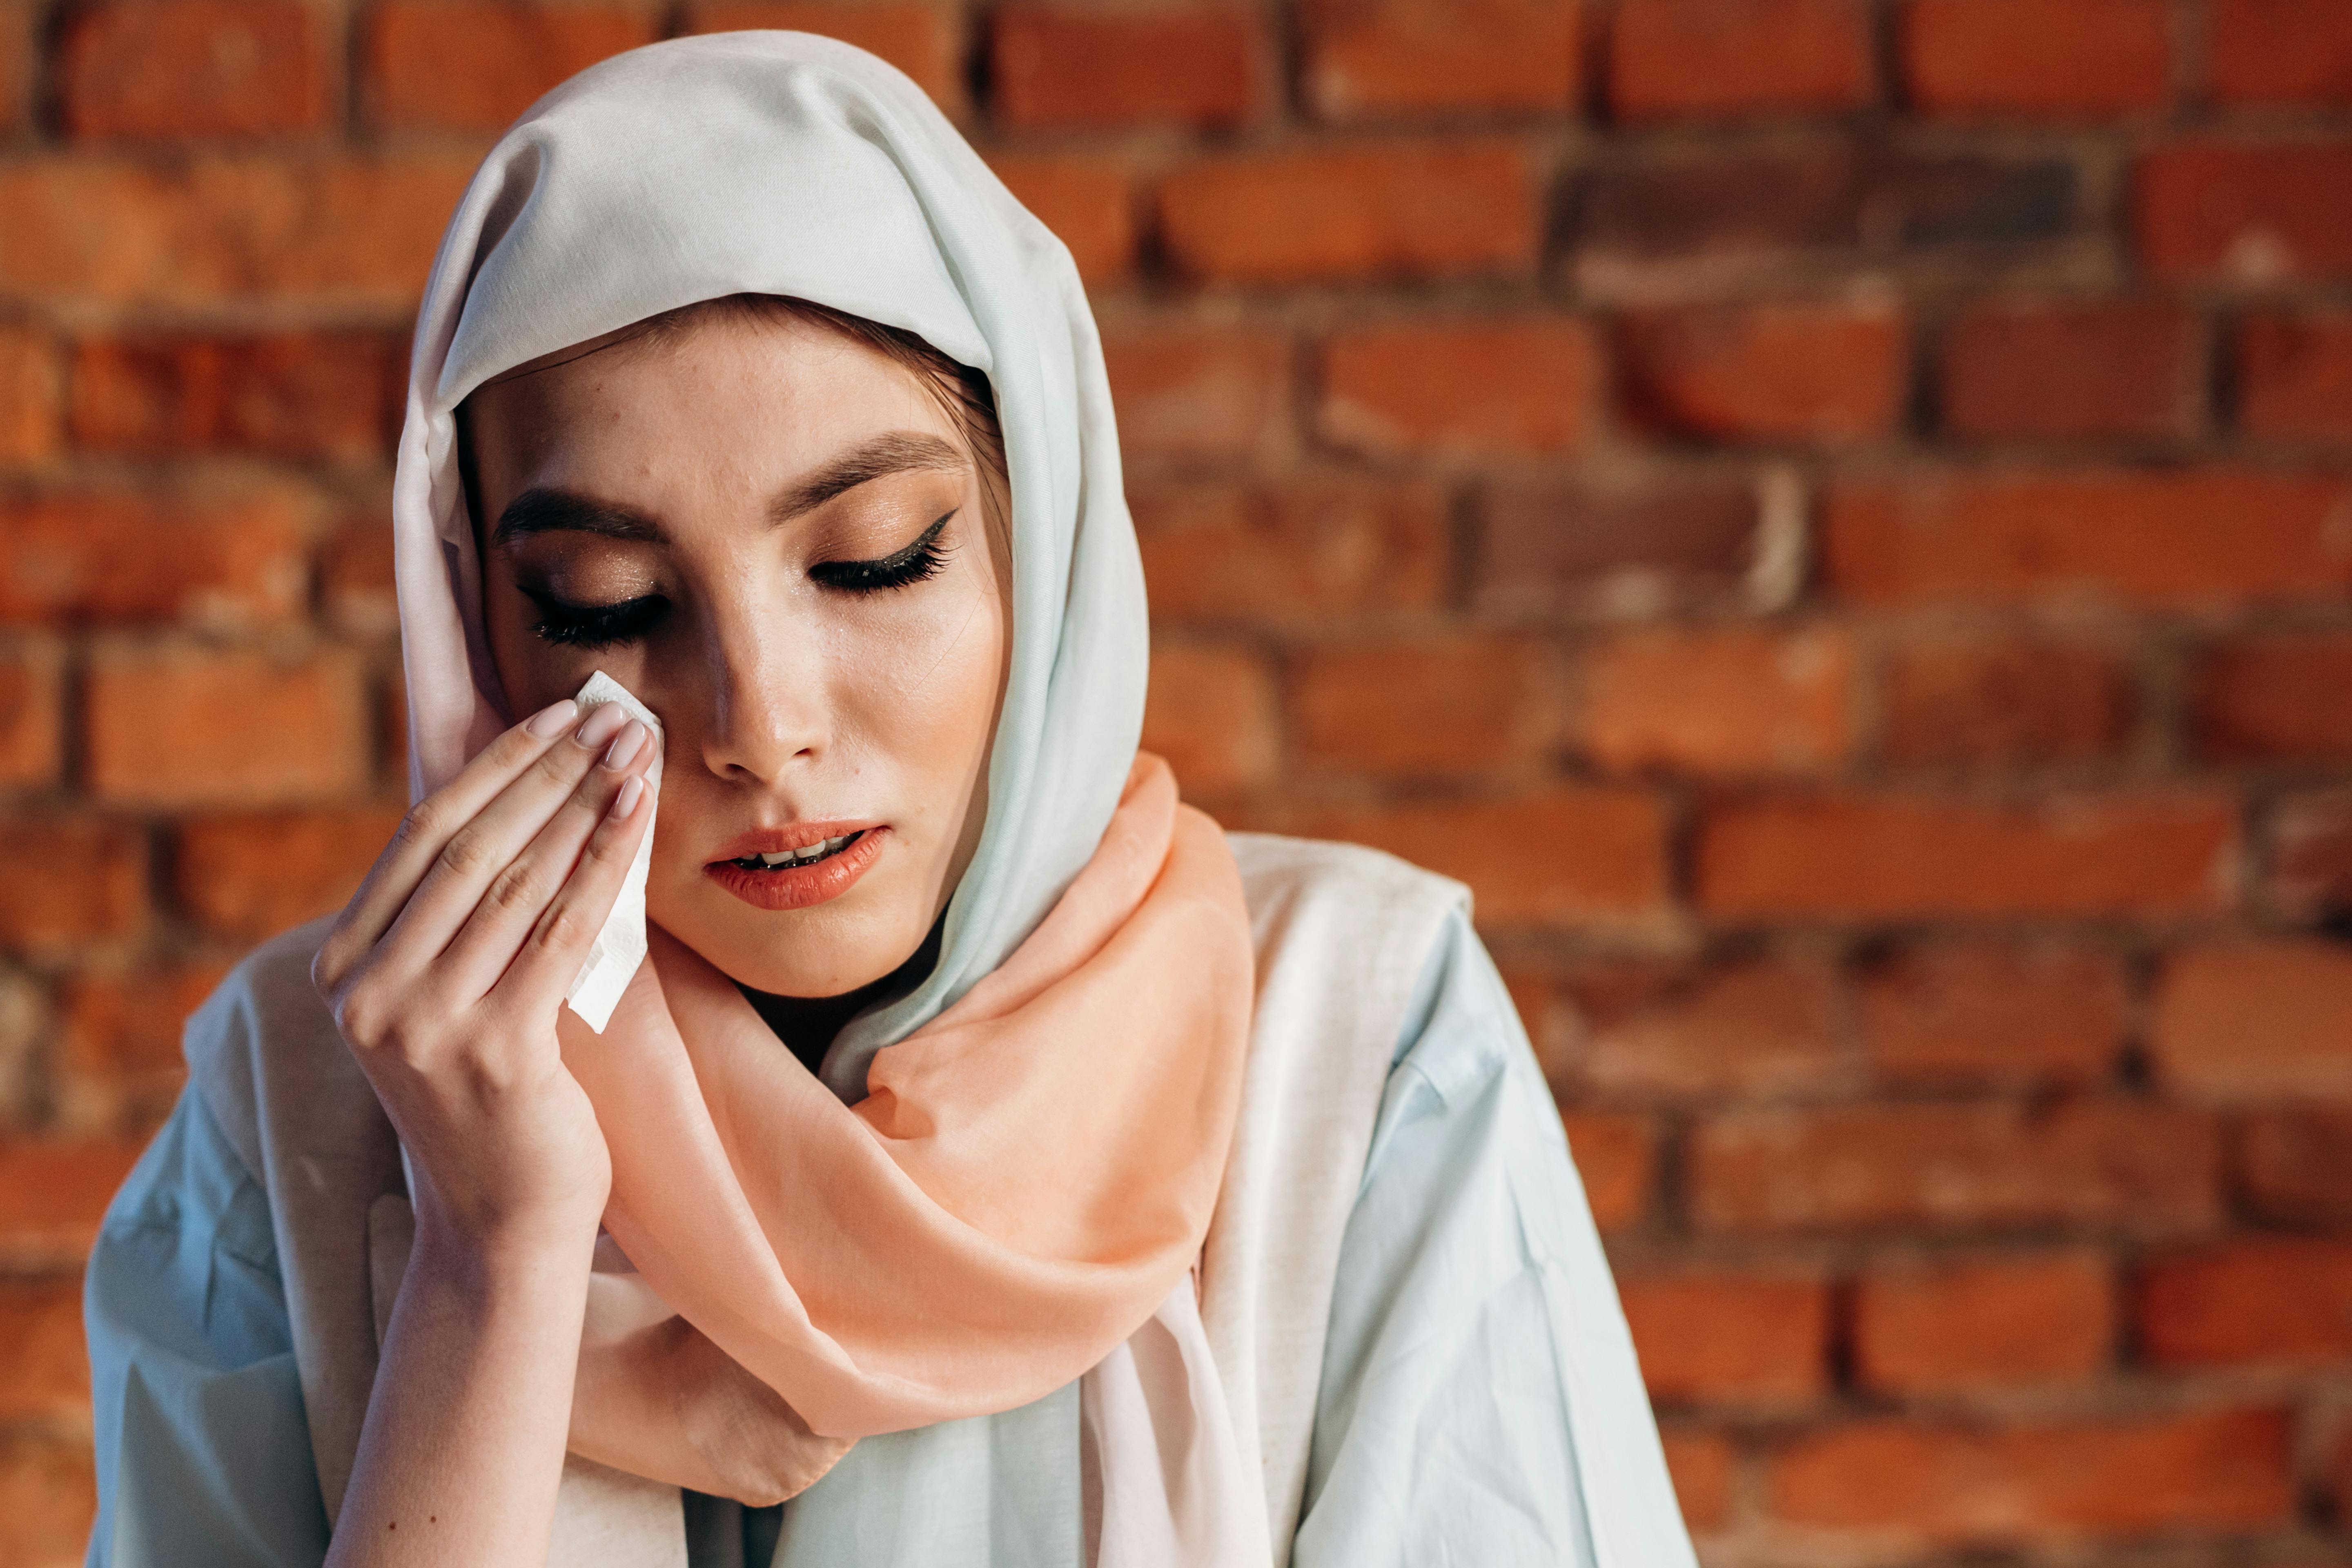 A sad woman wiping away her tears with a scarf | Source: Pexels